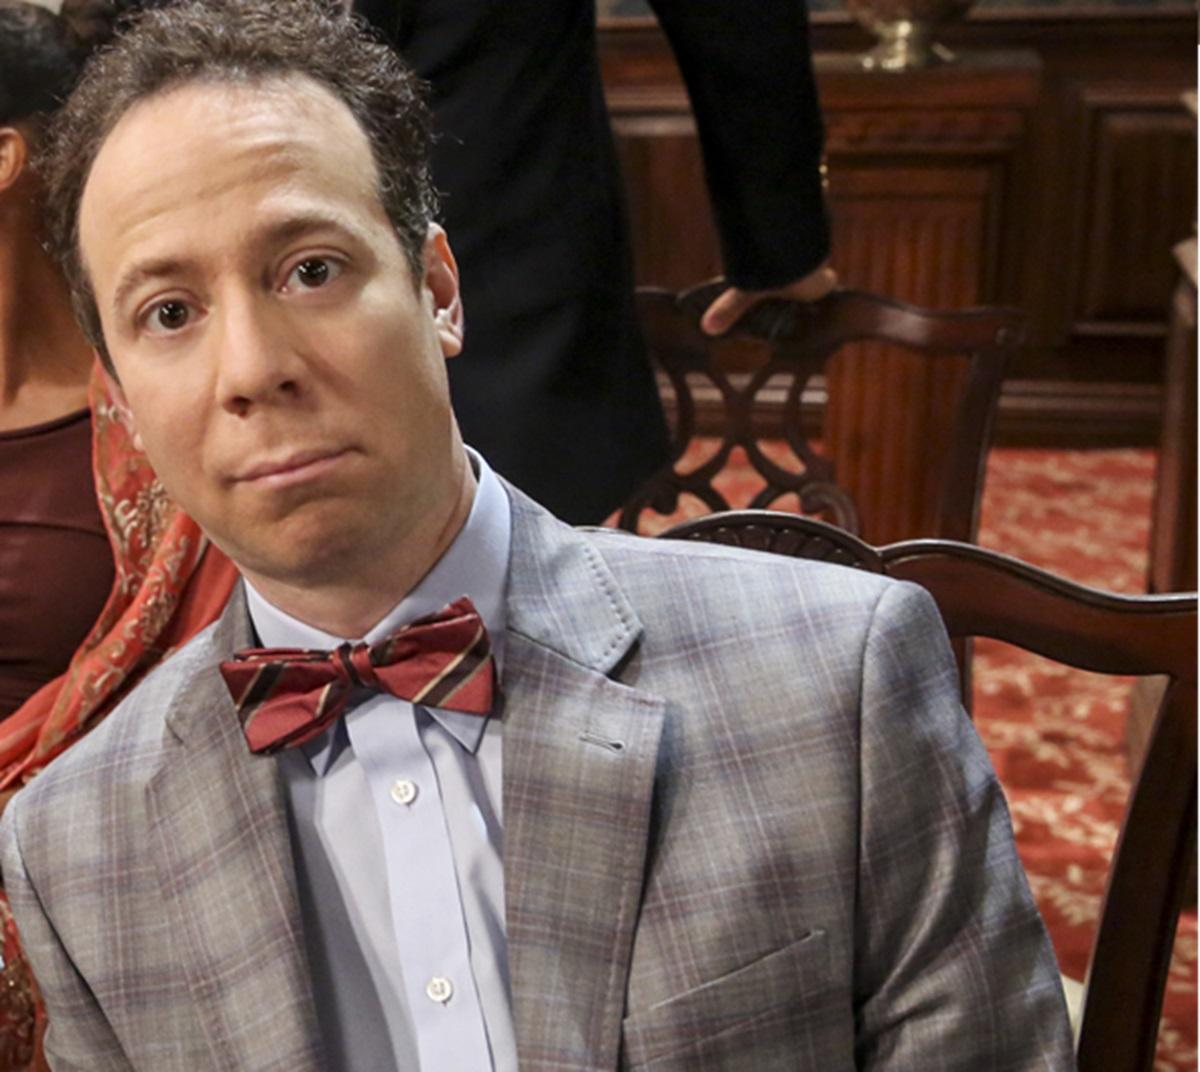 Stuart Bloom is seen as Sheldon and Amy